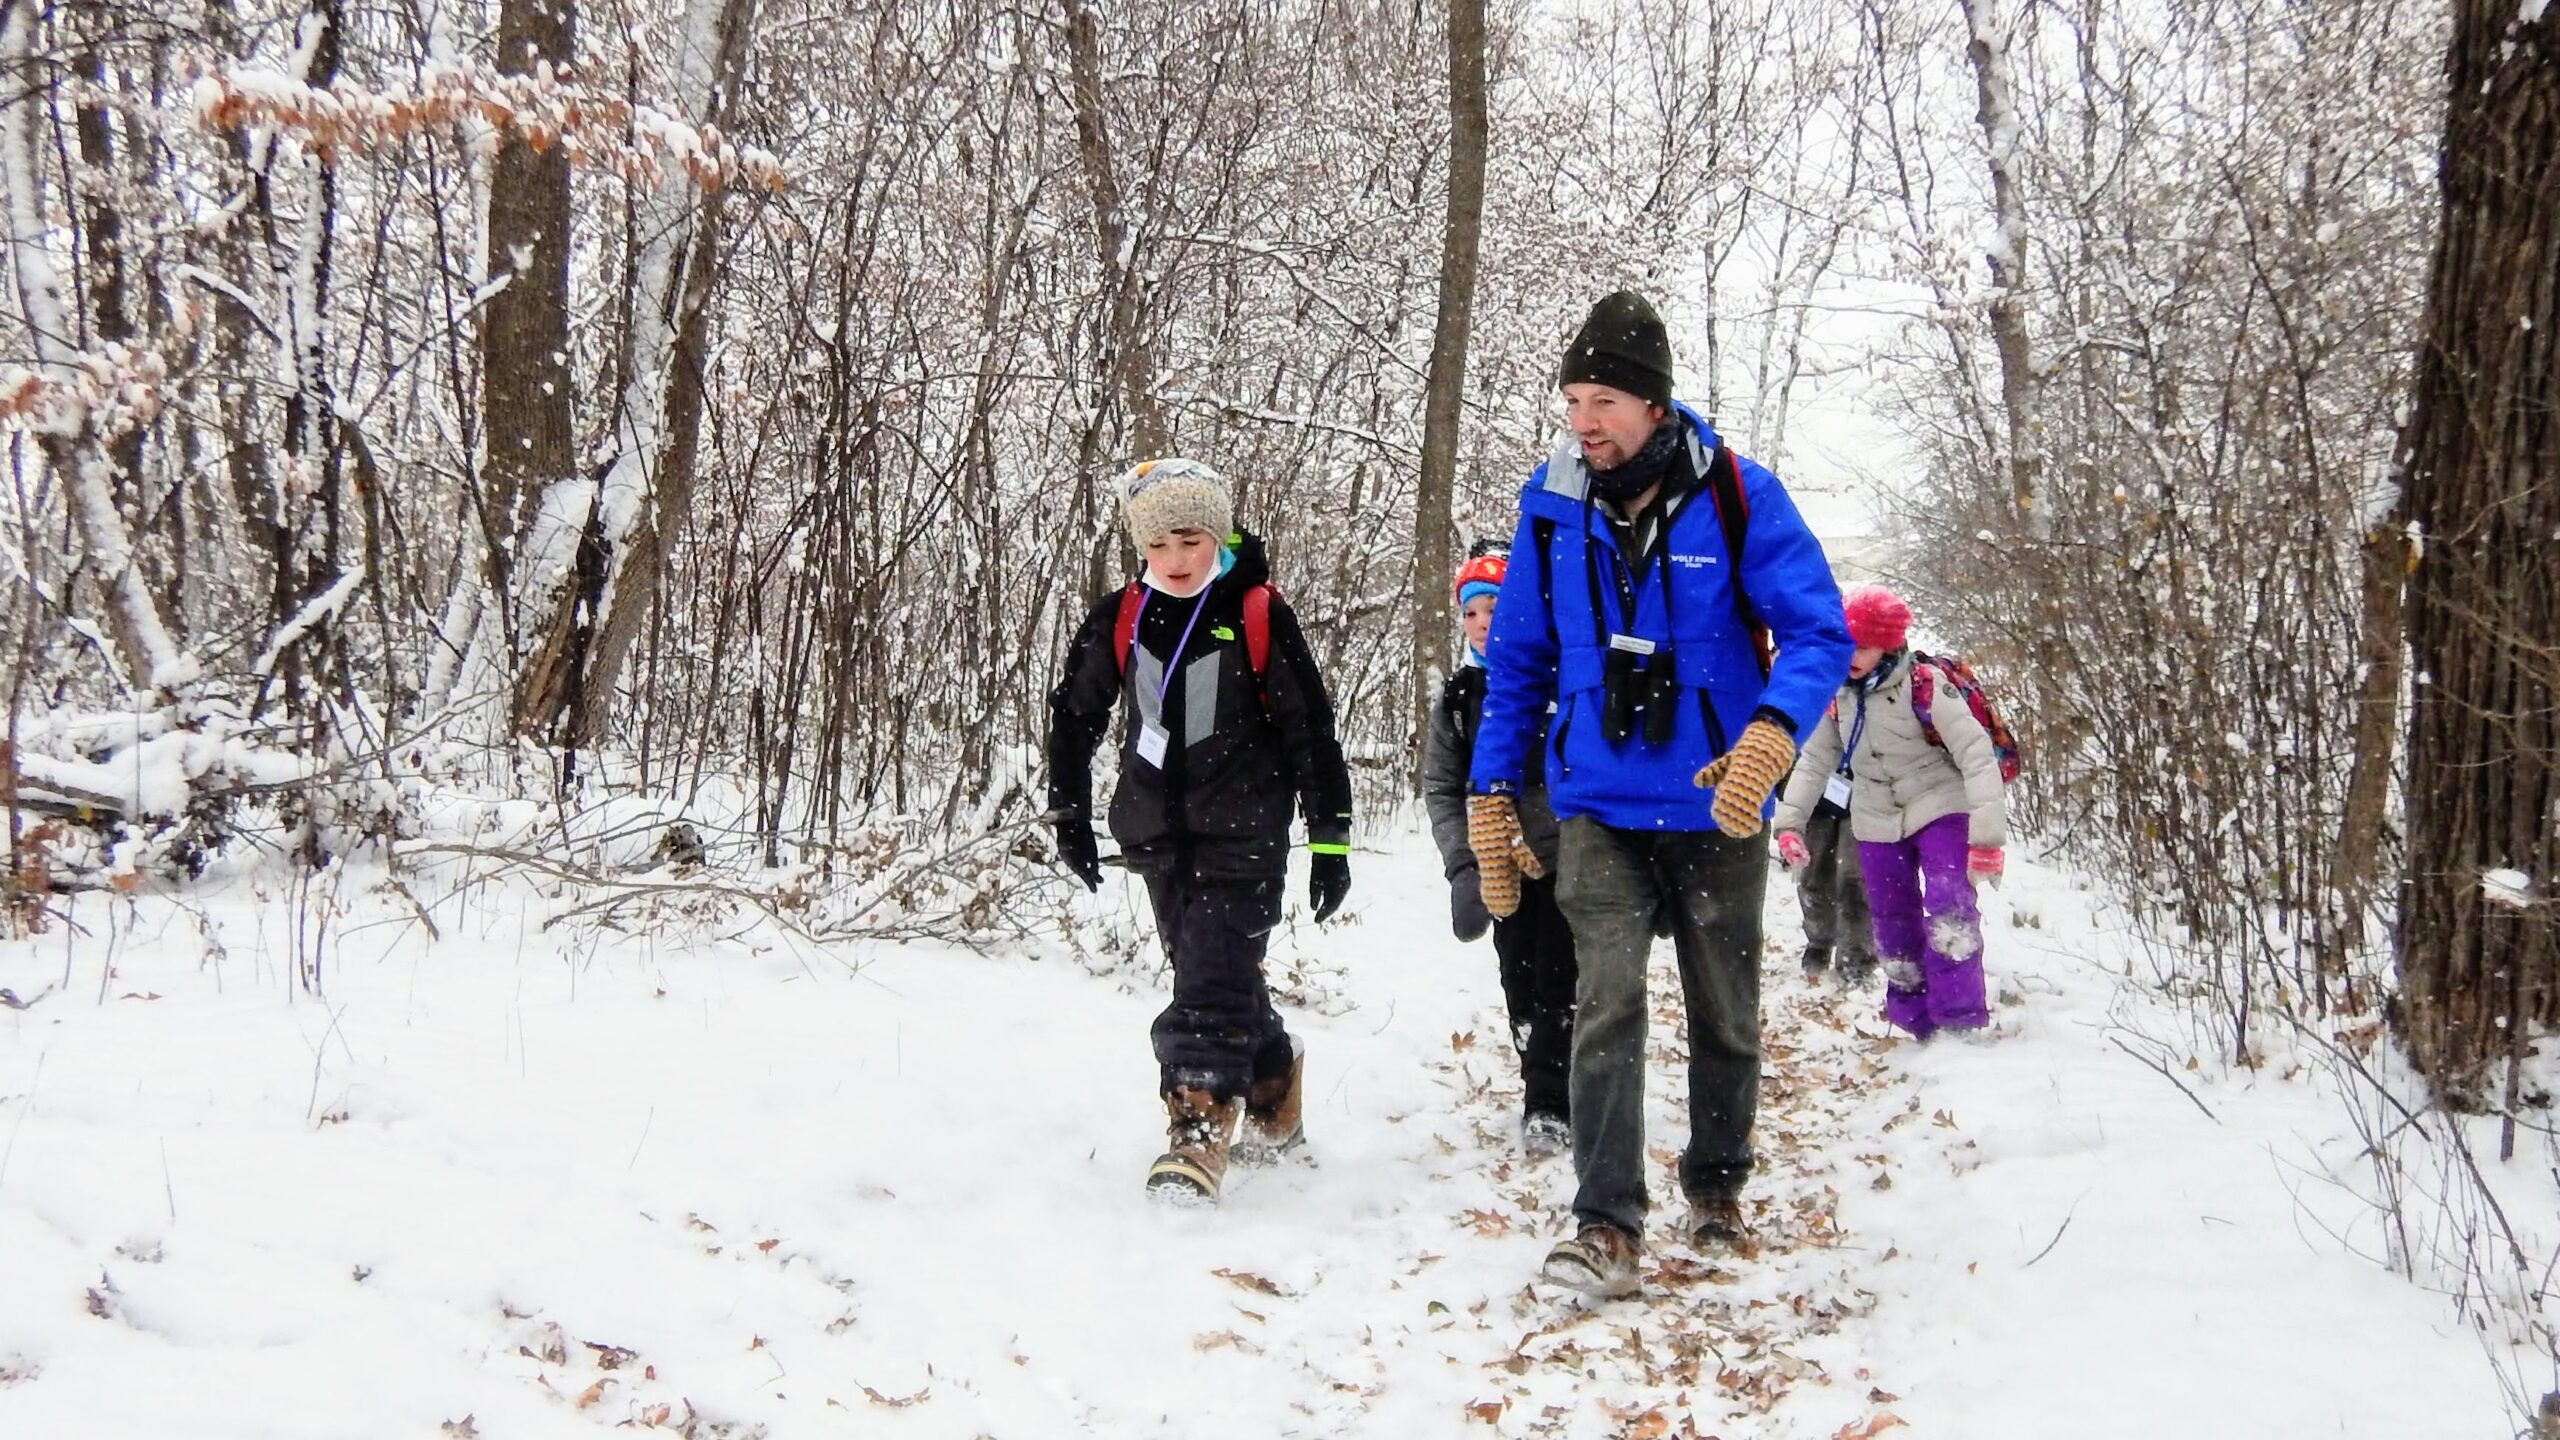 Students and teacher on walk in snowy woods